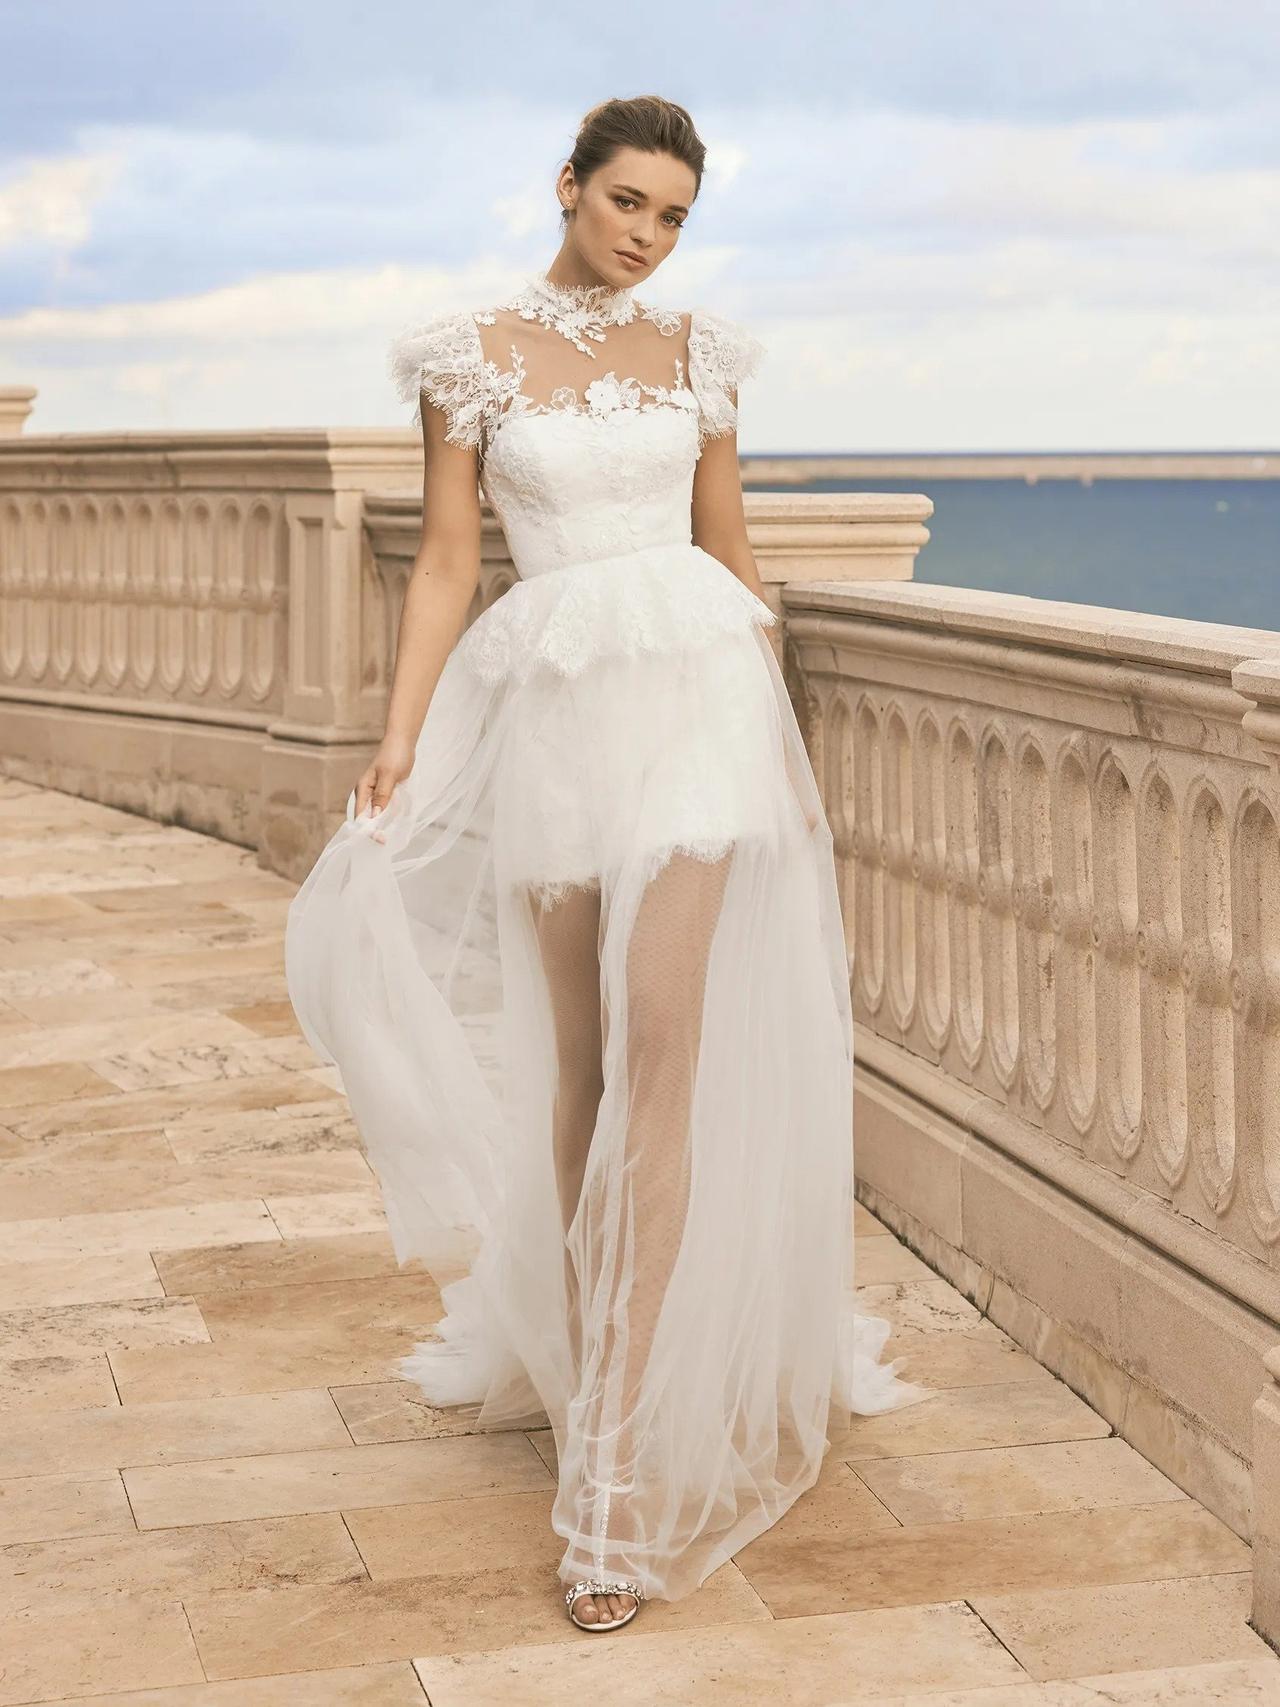 11 Dramatic Back Wedding Dresses for the Statement Bride